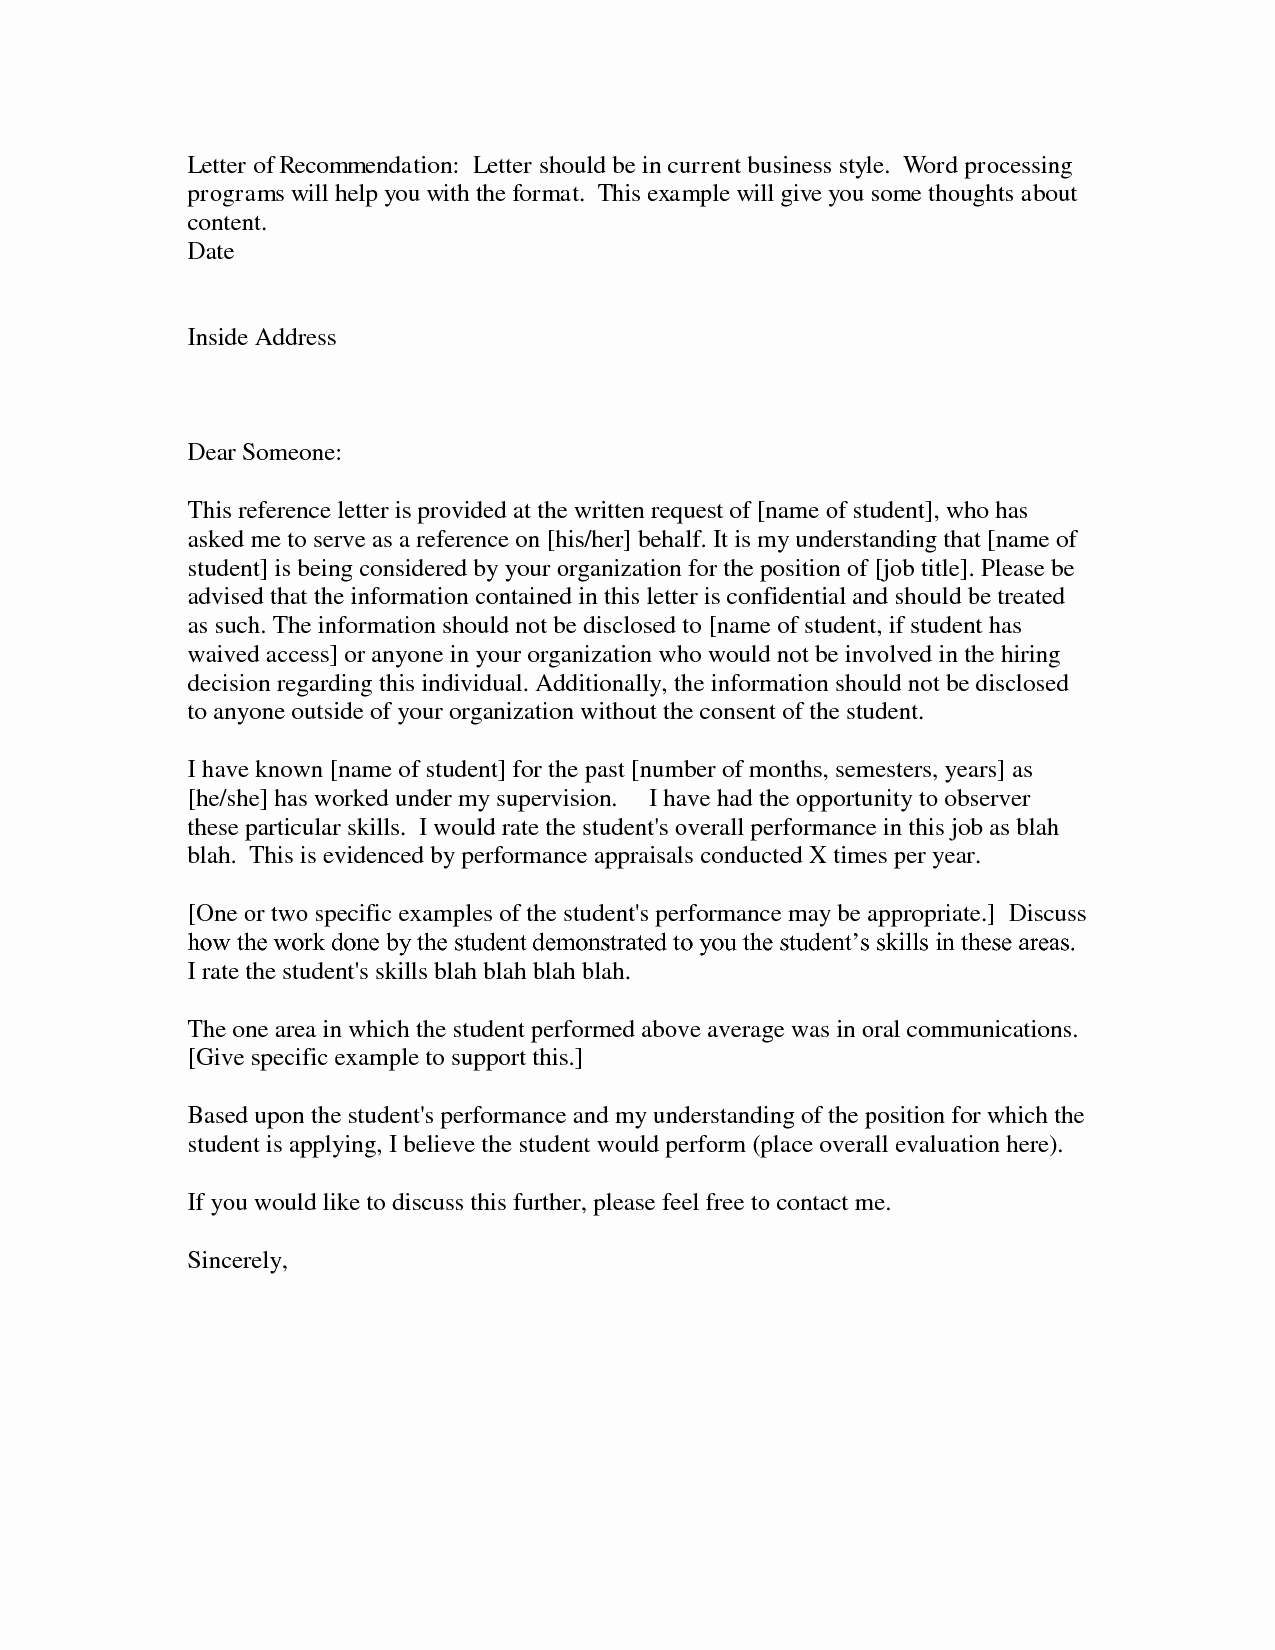 Templates for Letter Of Recommendation Fresh Business Reference Letter Template Example Mughals